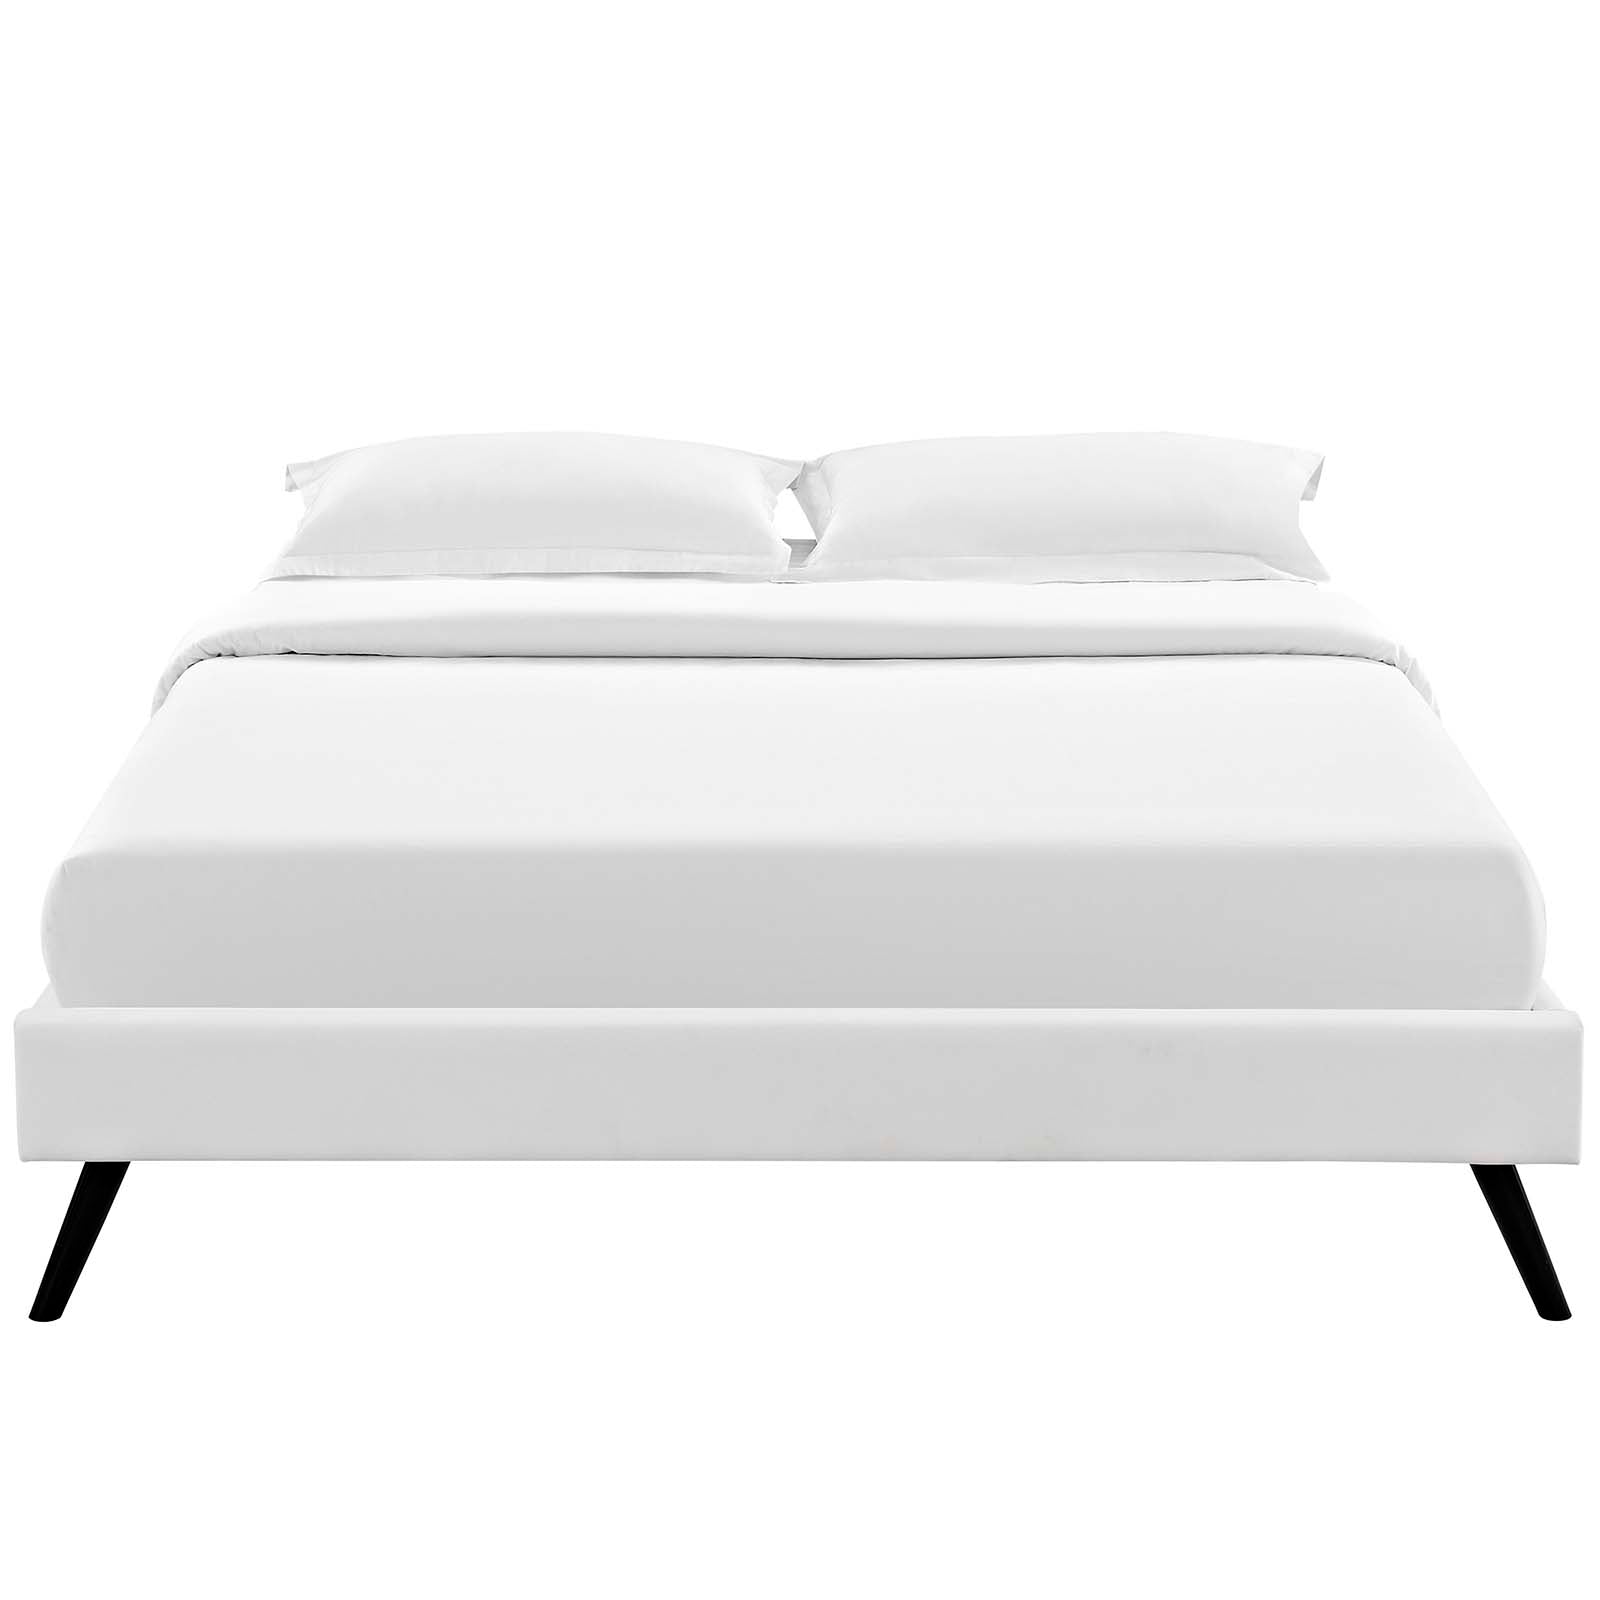 Loryn King Vinyl Bed Frame with Round Splayed Legs - East Shore Modern Home Furnishings